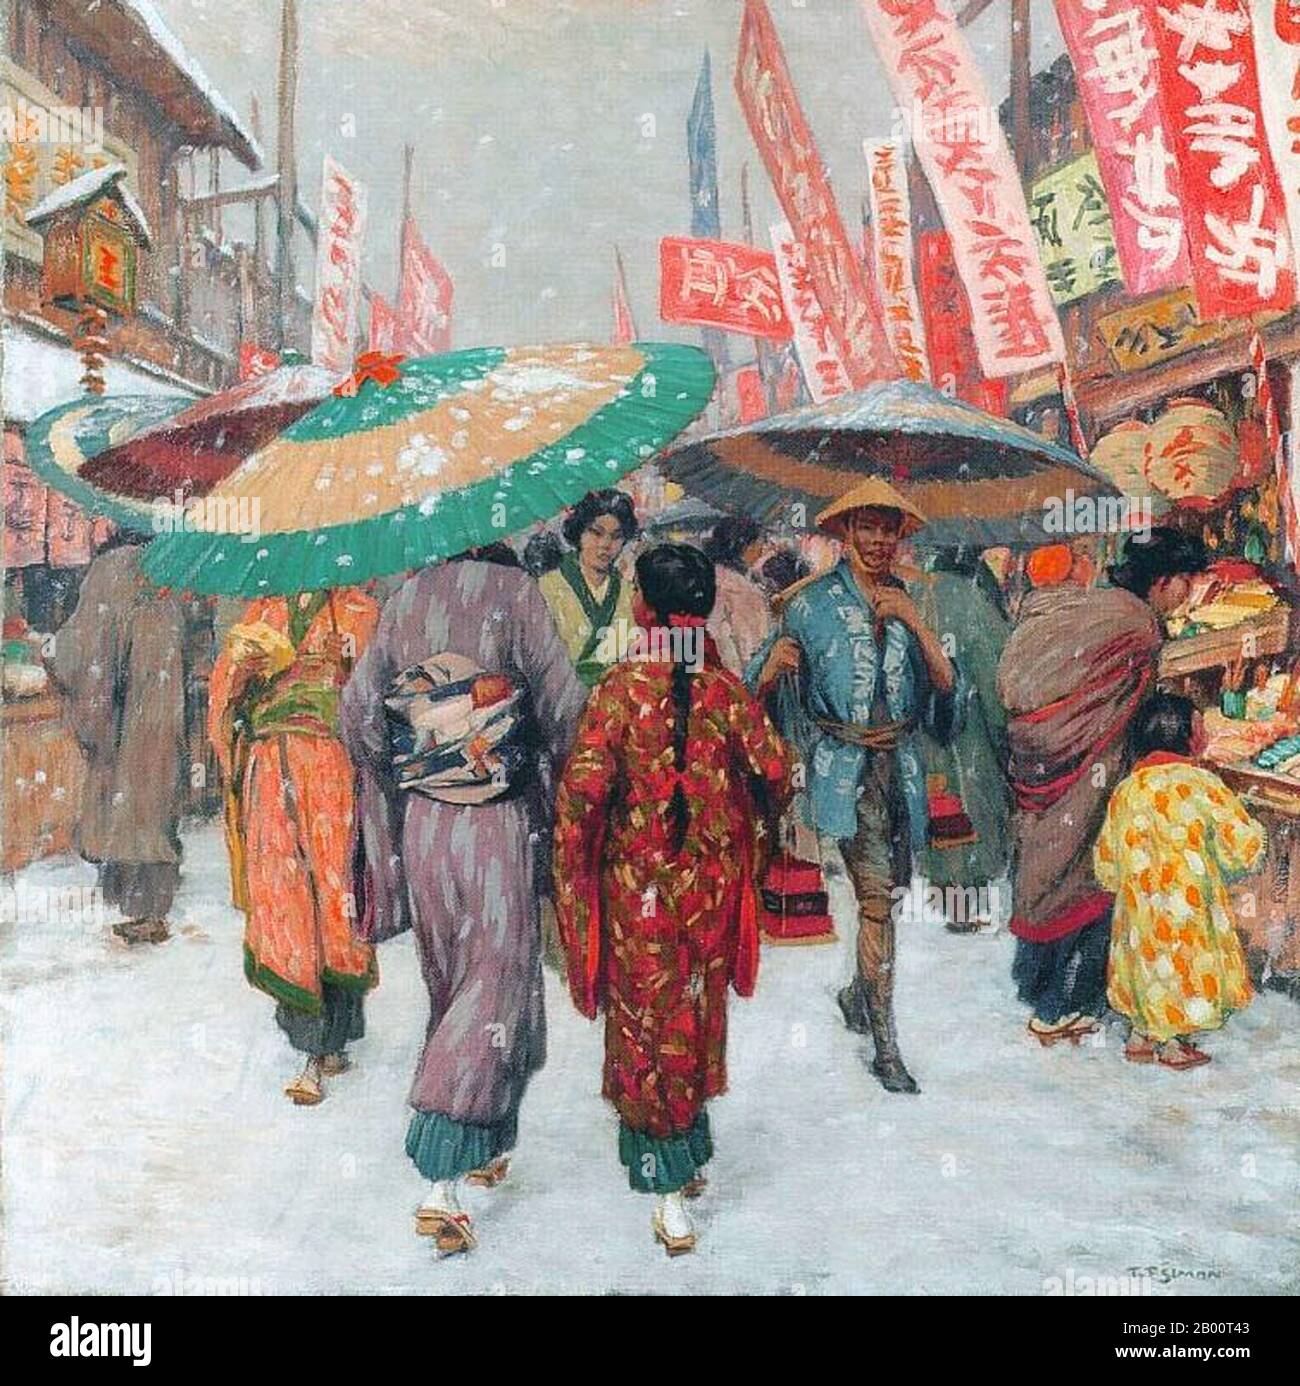 Japan/Czechoslovakia: 'Kyoto Street Scene in Winter'. Painting by T. F. Simon (1877-1942), c. 1928.  Tavik Frantisek Simon (1877–1942), was a Czech painter, etcher, and woodcut artist. Although based mainly in Europe, his extensive travels took him to Morocco, Ceylon (now Sri Lanka), India, and Japan, images of all of which appear in his  artistic work. He died in Prague in 1942. Largely ignored during the Communist era in Czechoslovakia, his work has received greater attention in recent years. Stock Photo